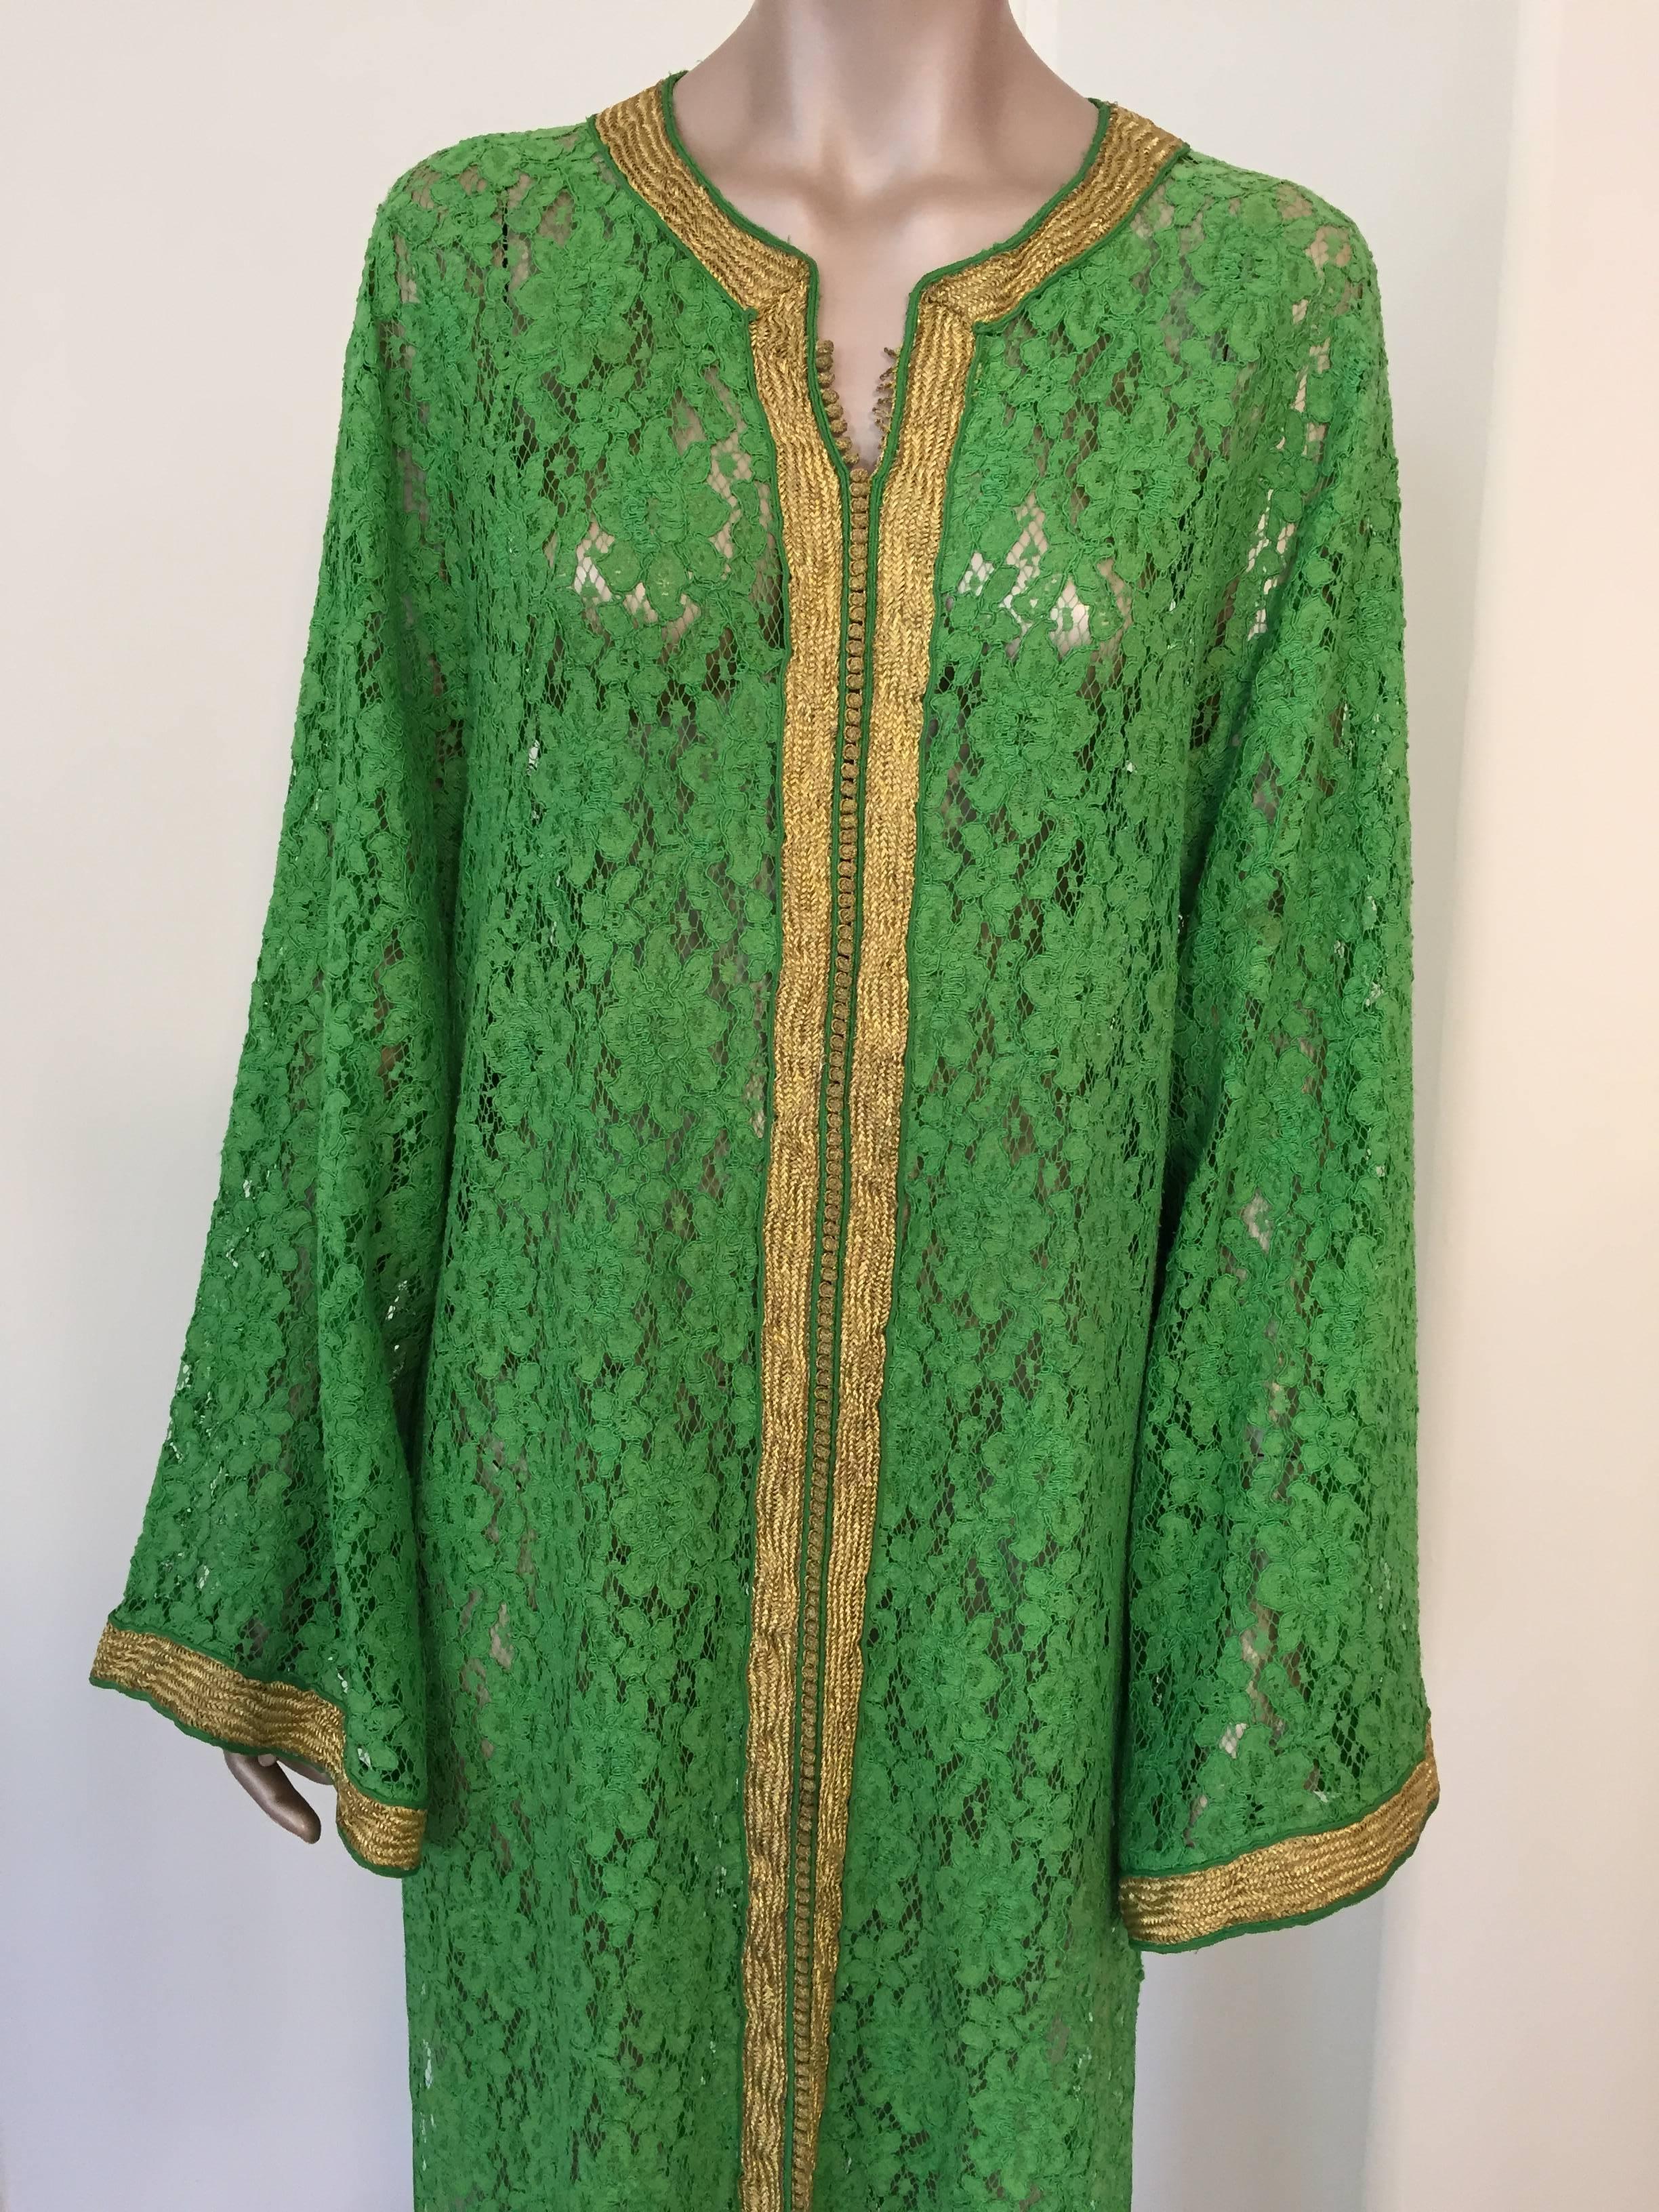 Moroccan Emerald Green Lace and Gold Trim Caftan Set 5